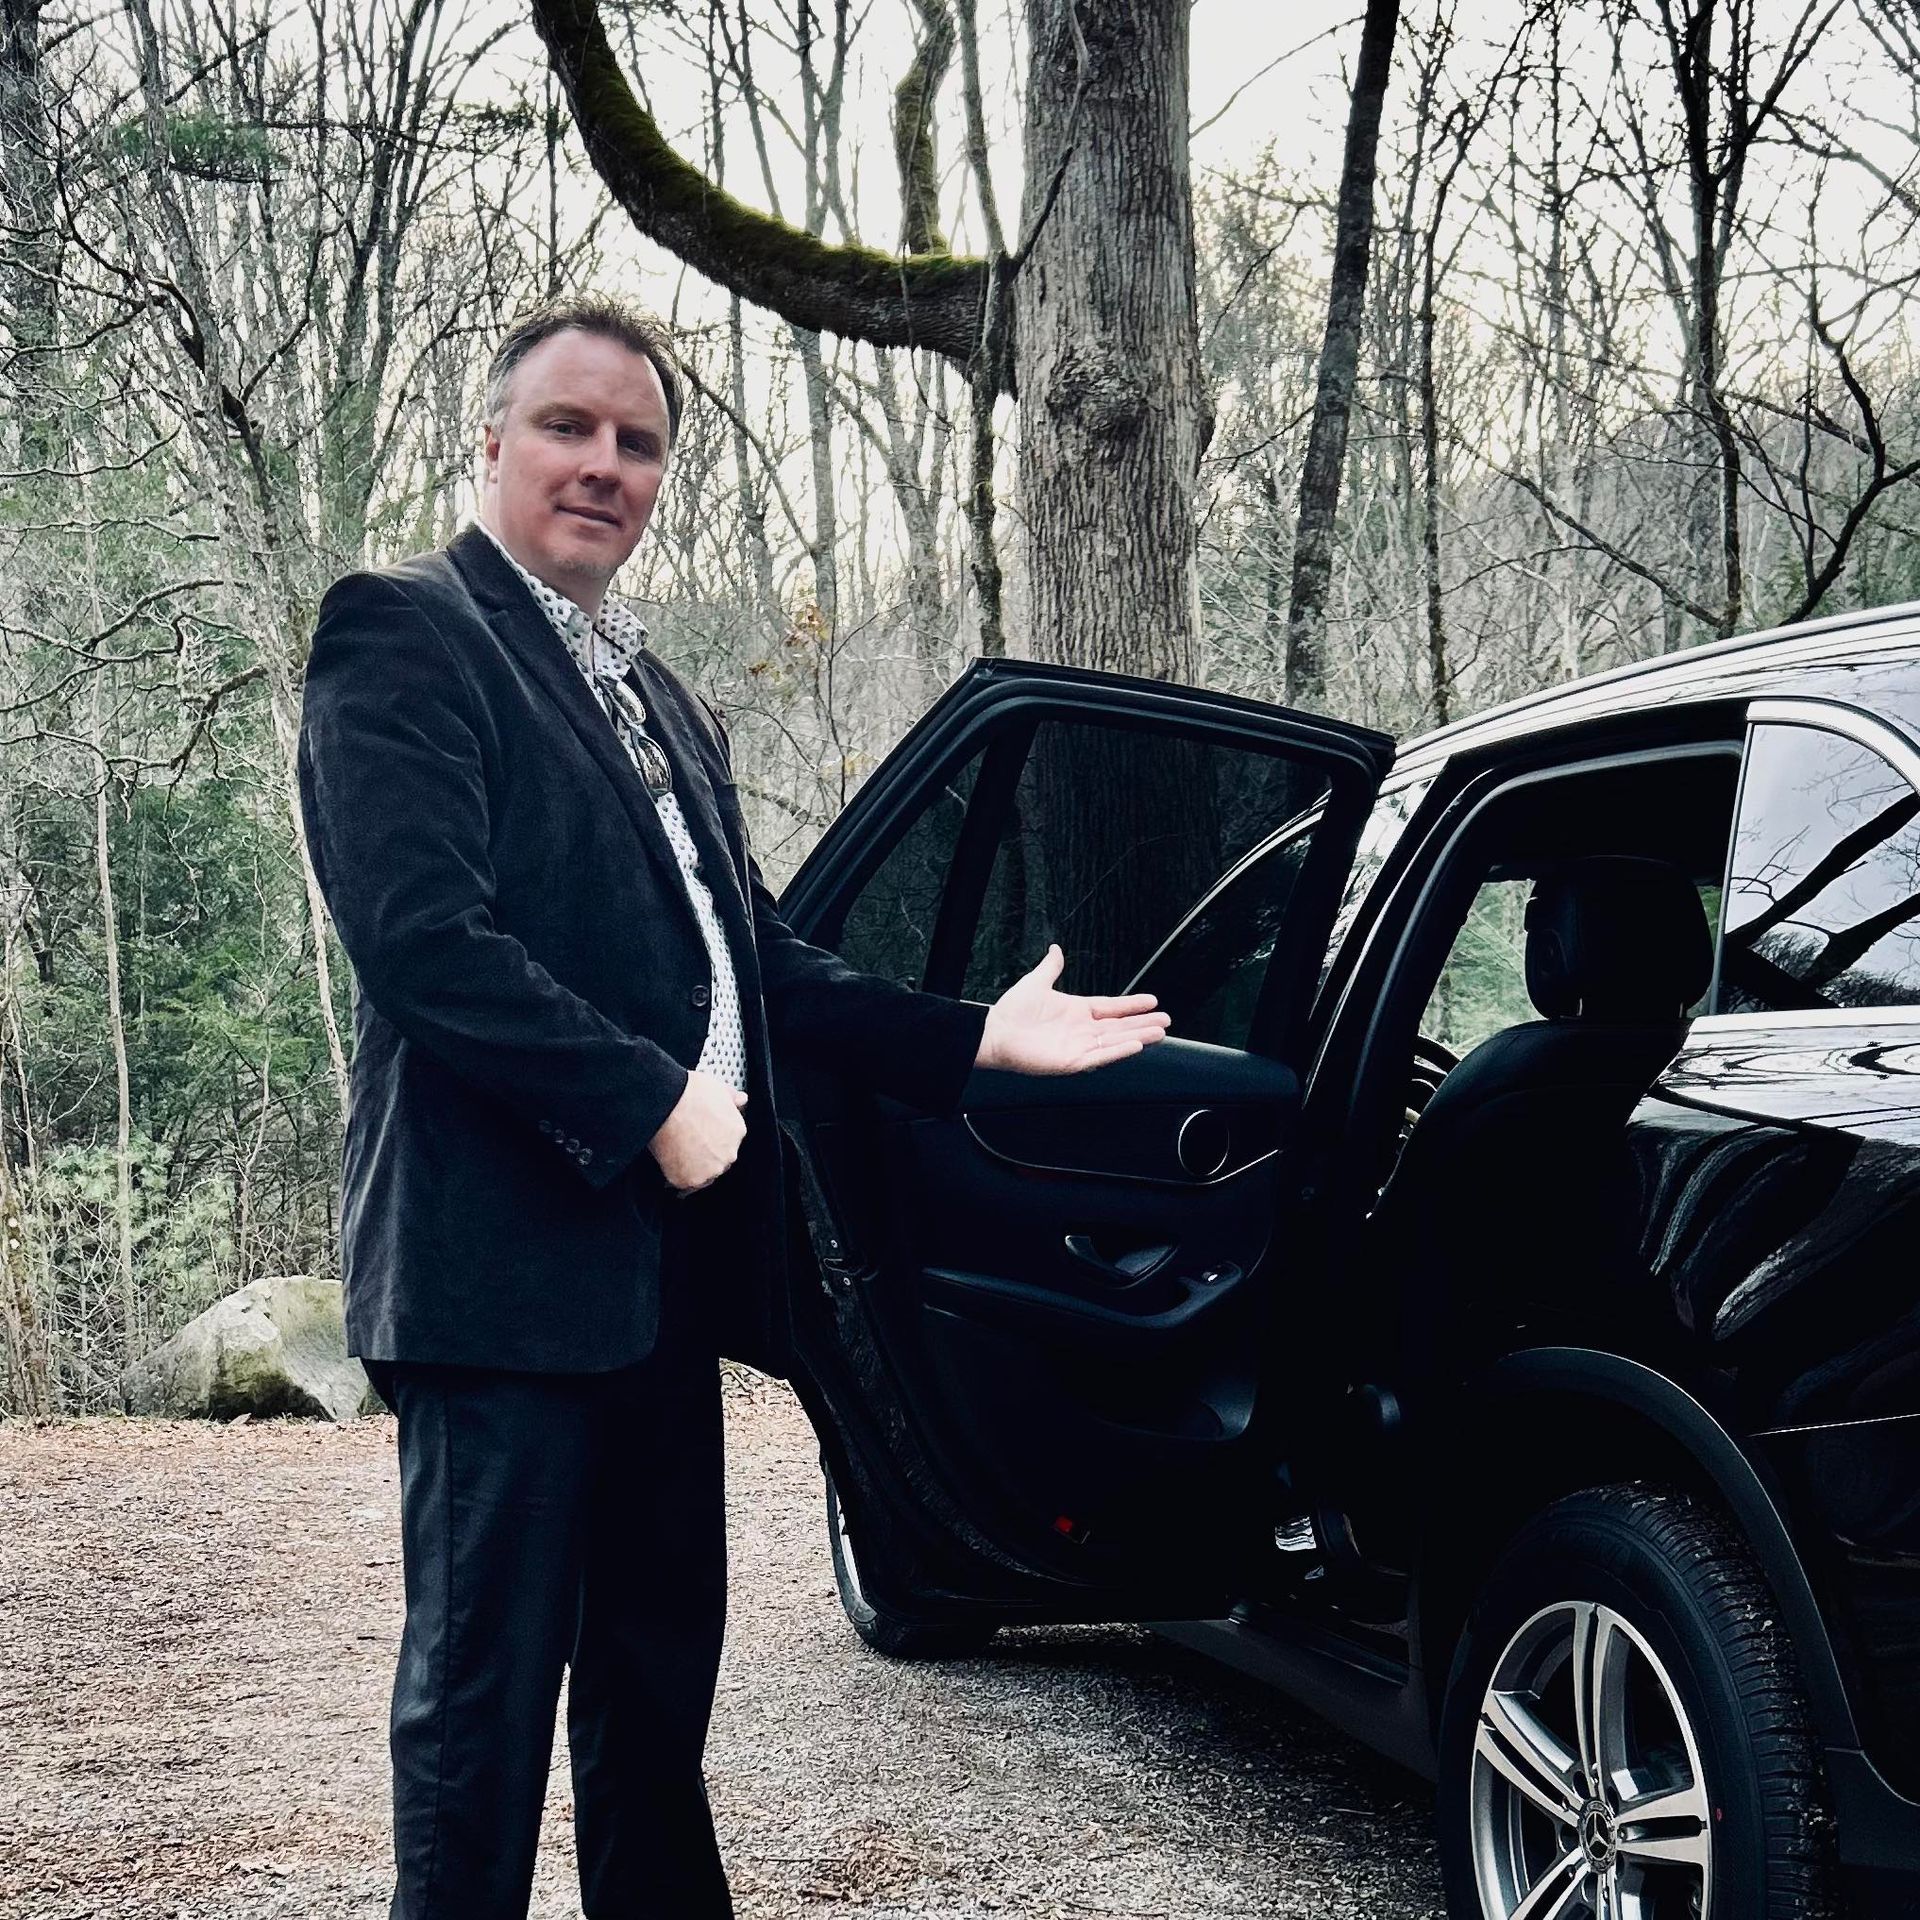 a man in a suit and tie is standing next to a black car .